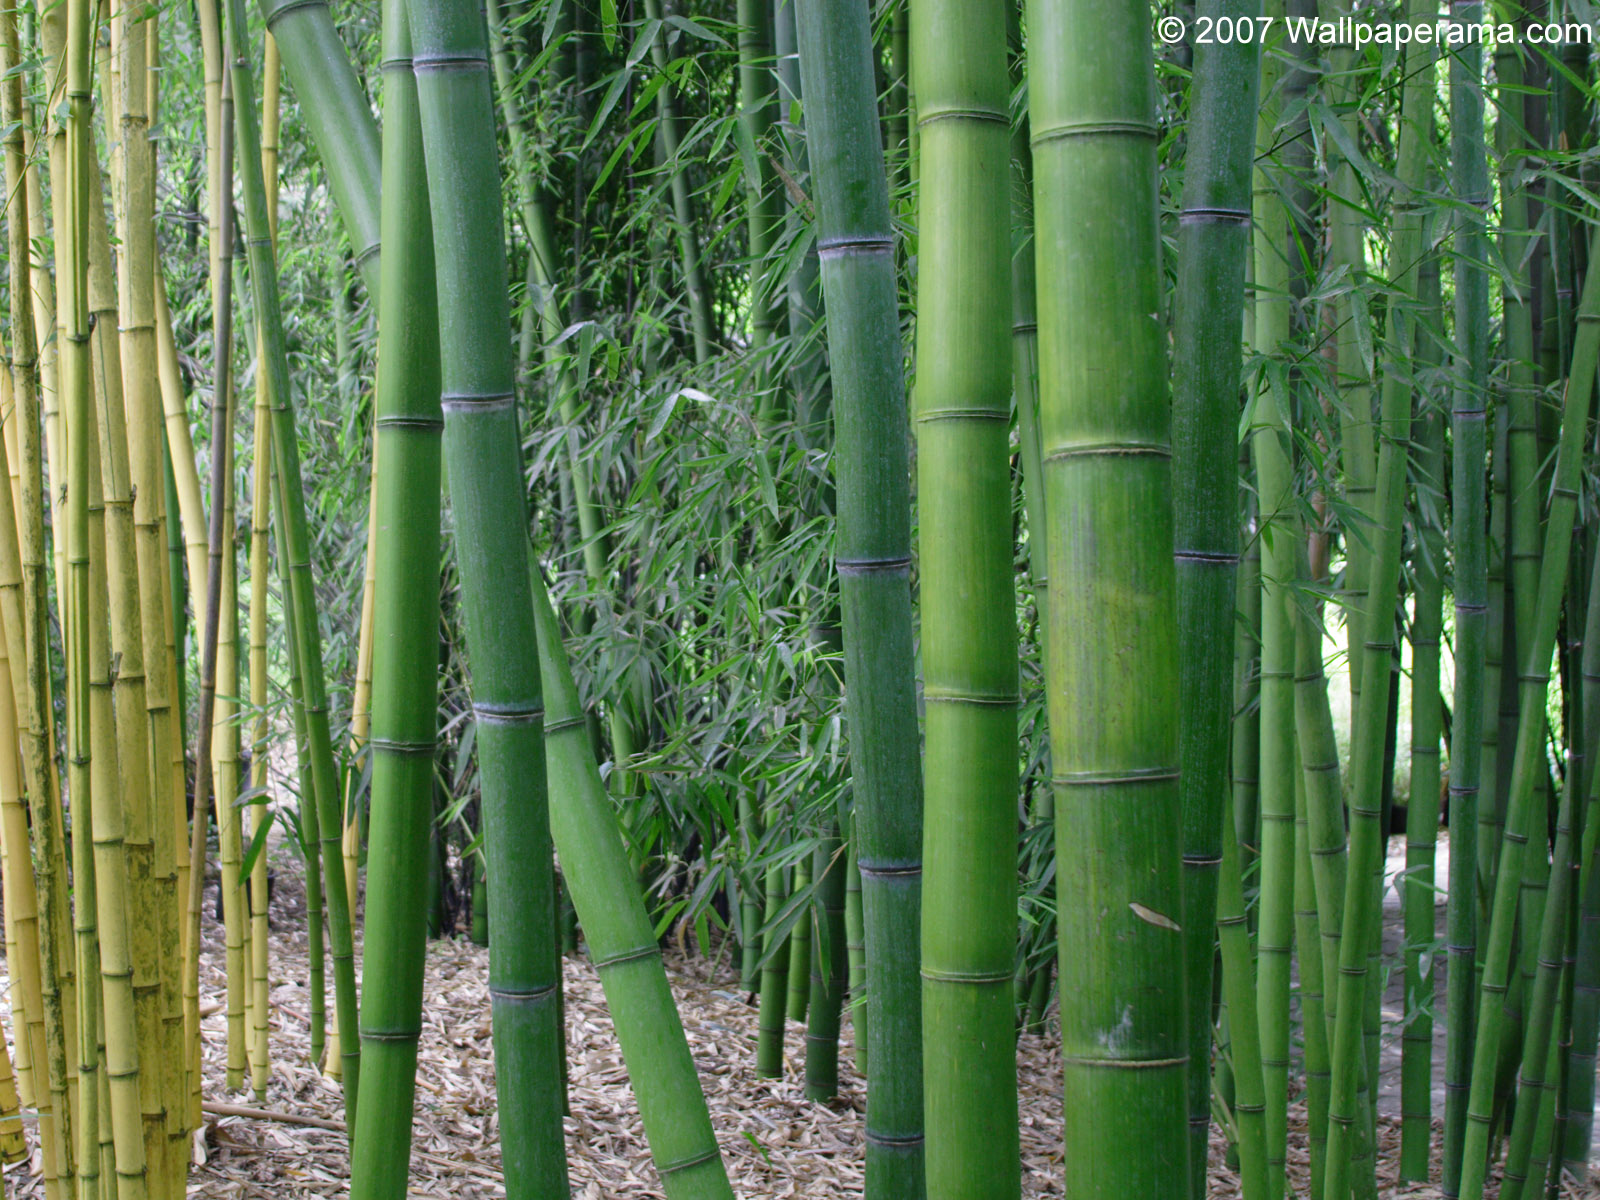 Bamboo Garden Wallpaper HD Background Image Pictures